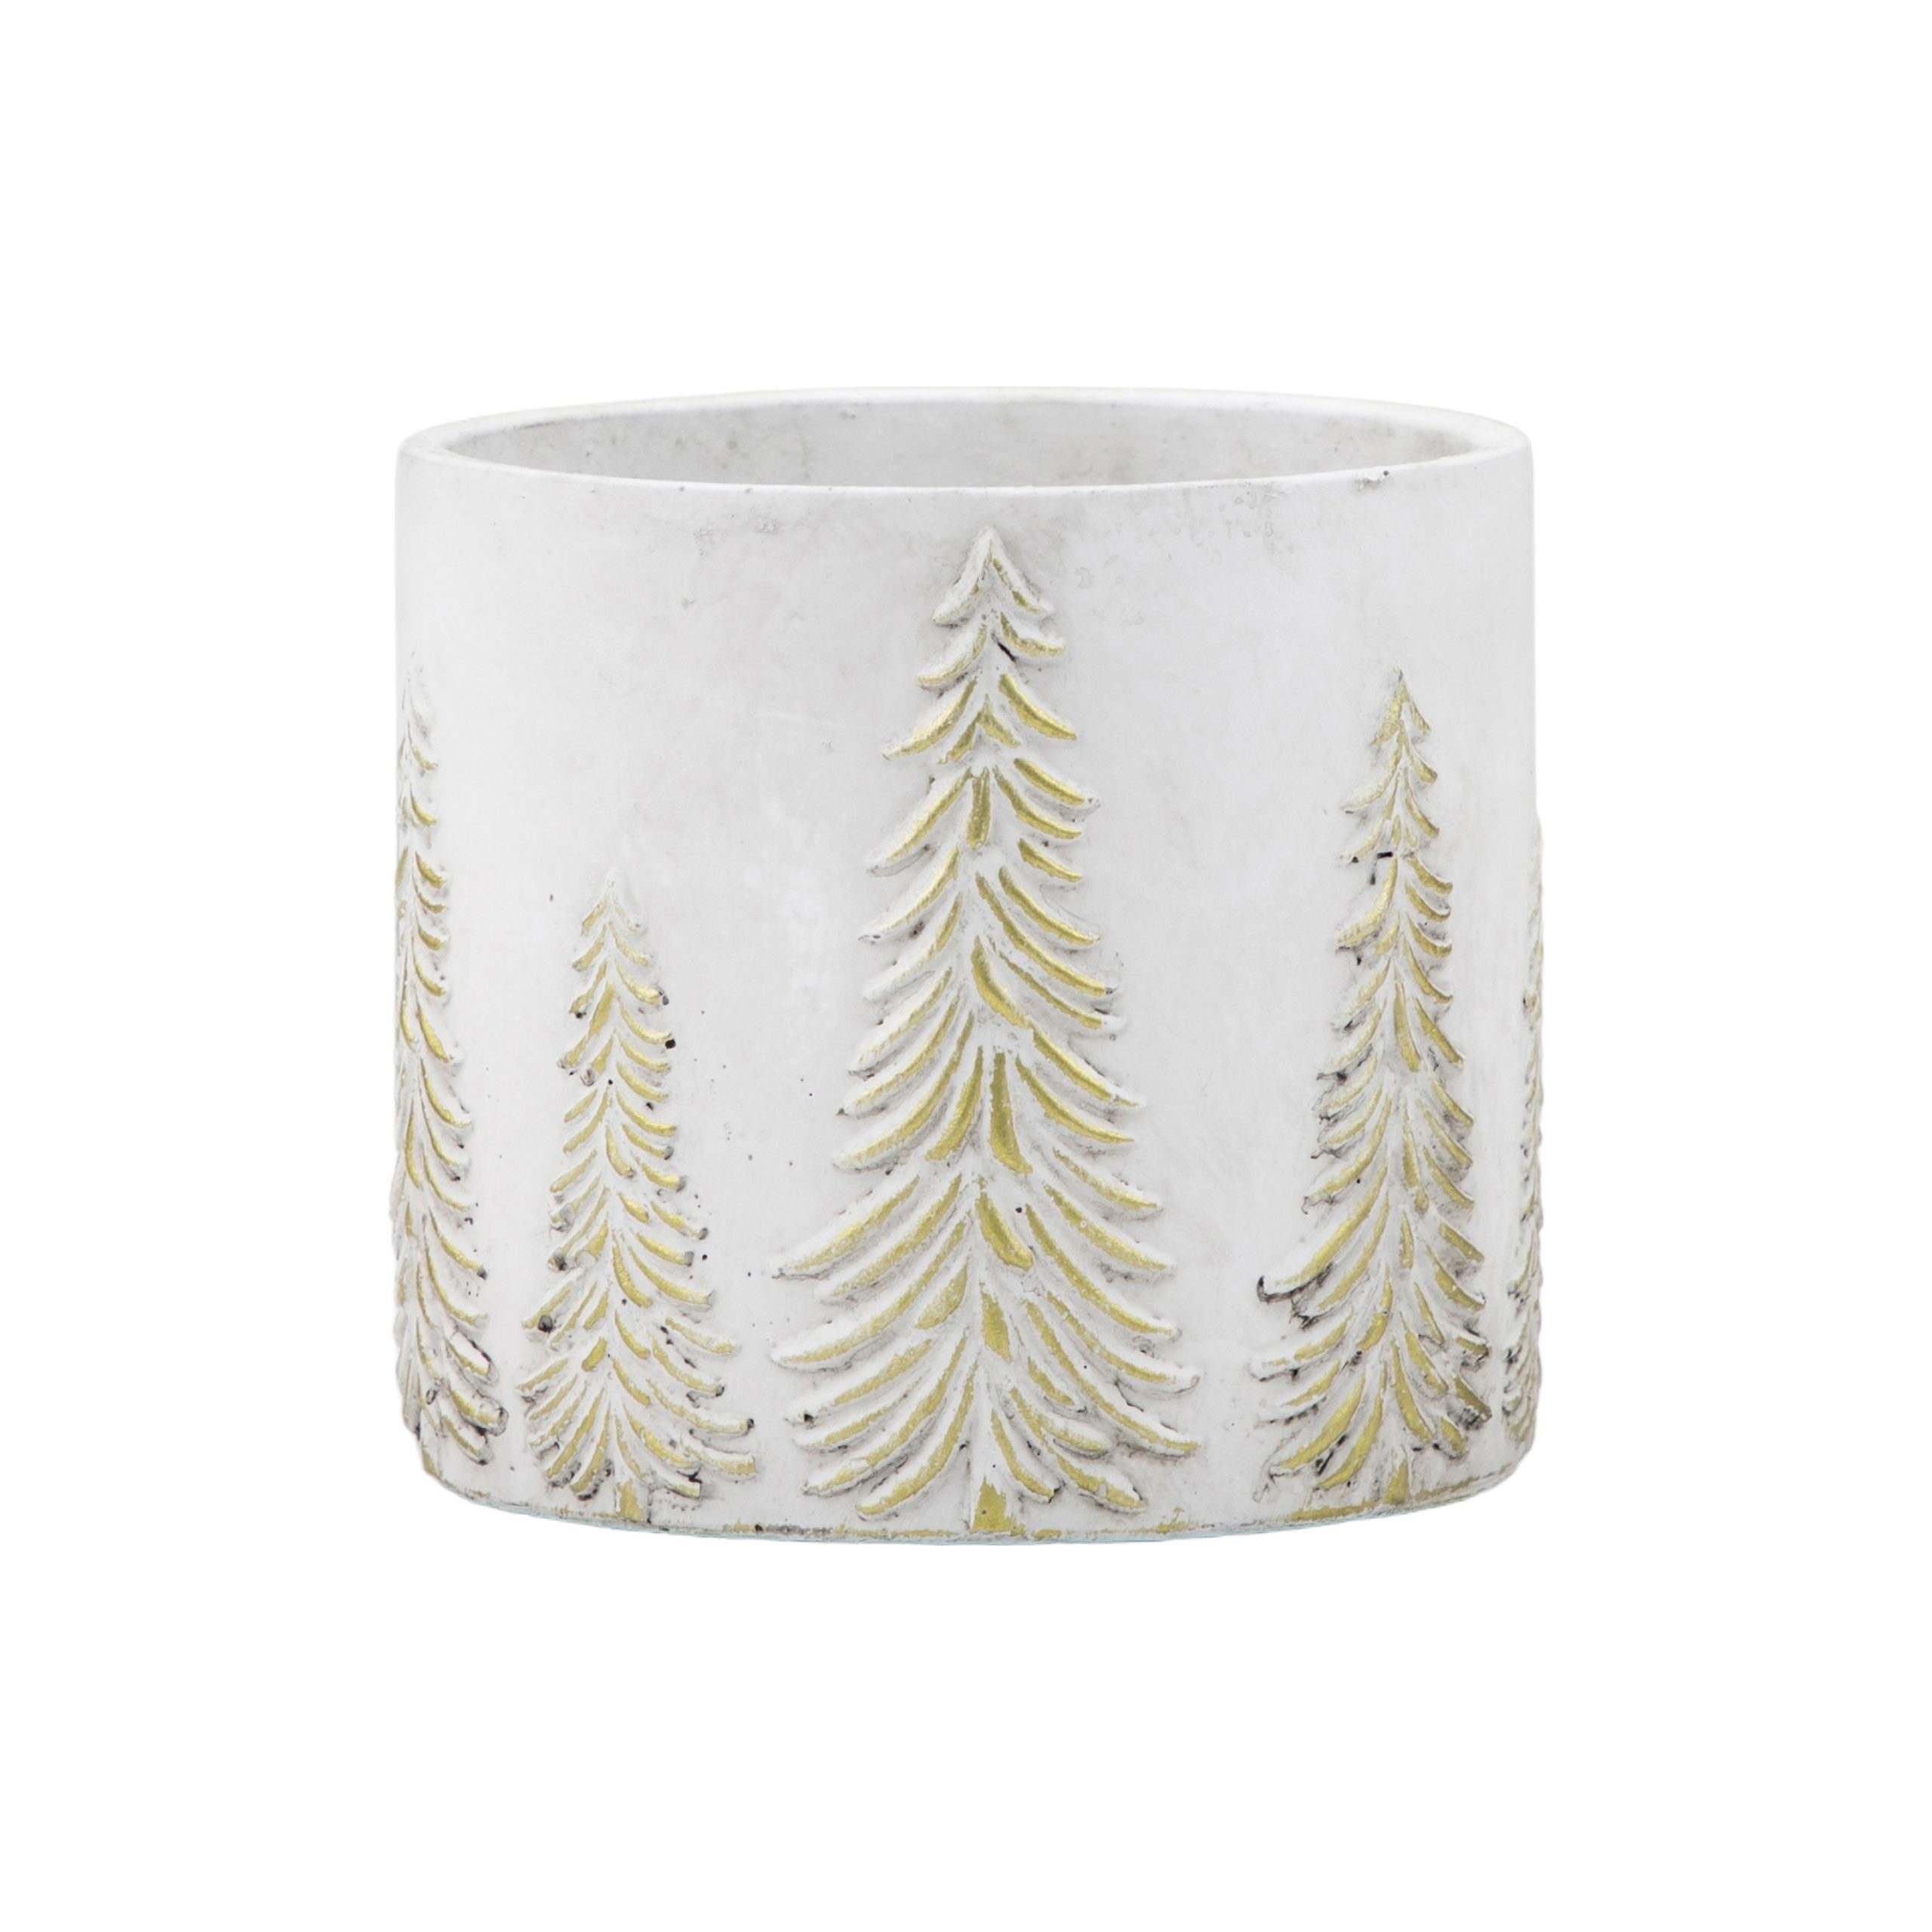 Gallery Direct Forest Planter White & Gold